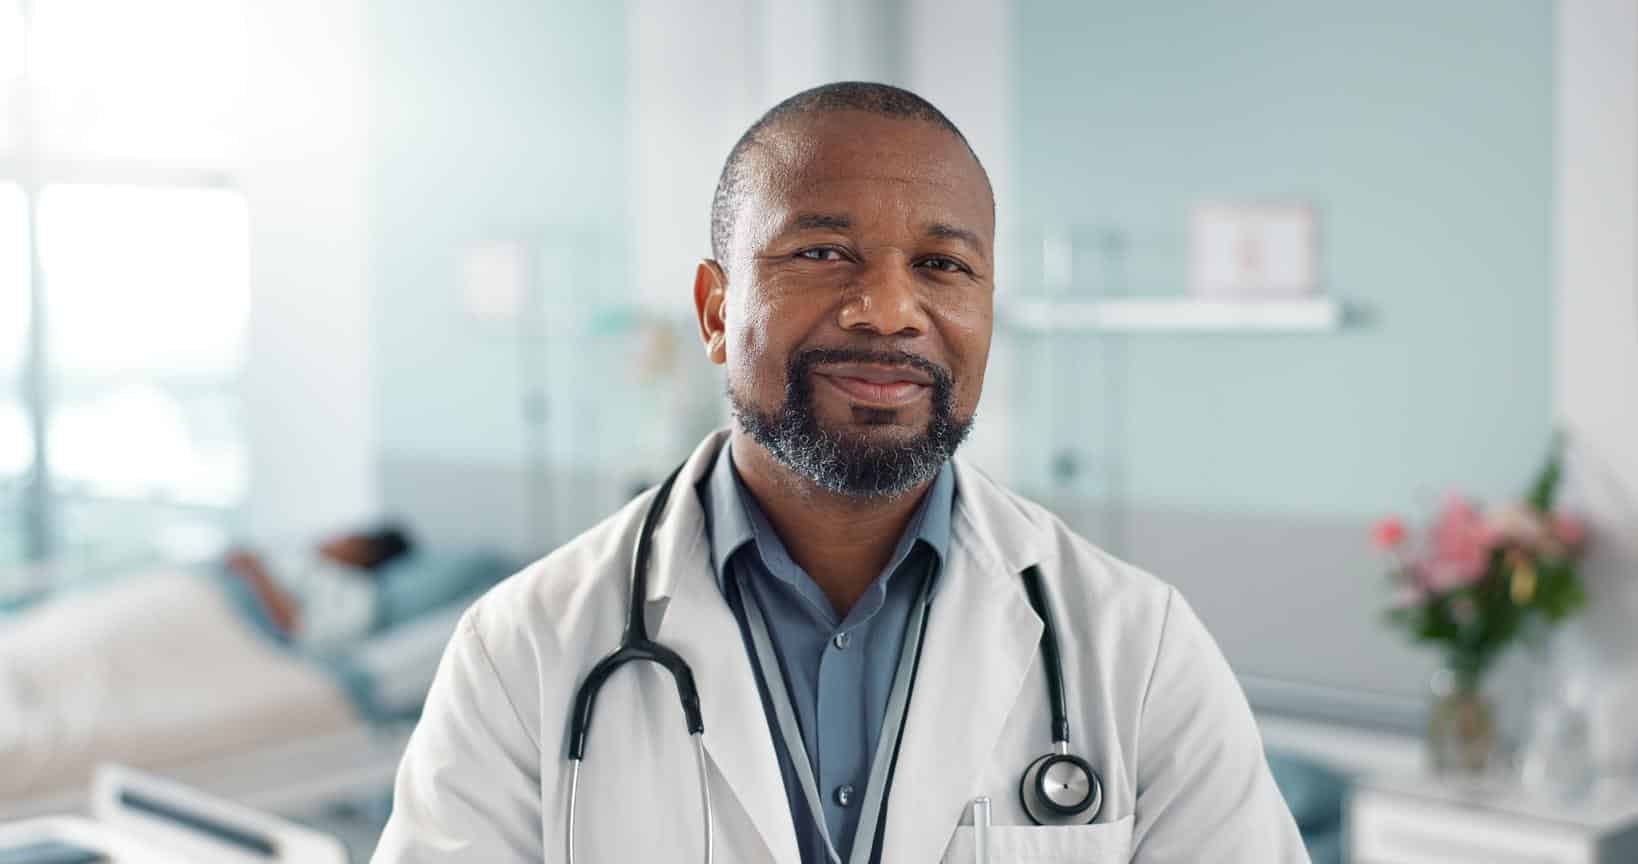 Healthcare, doctor and black man with arms crossed at hospital with smile for support, service and wellness. Medicine, professional and African expert with happiness and pride for career or surgery.